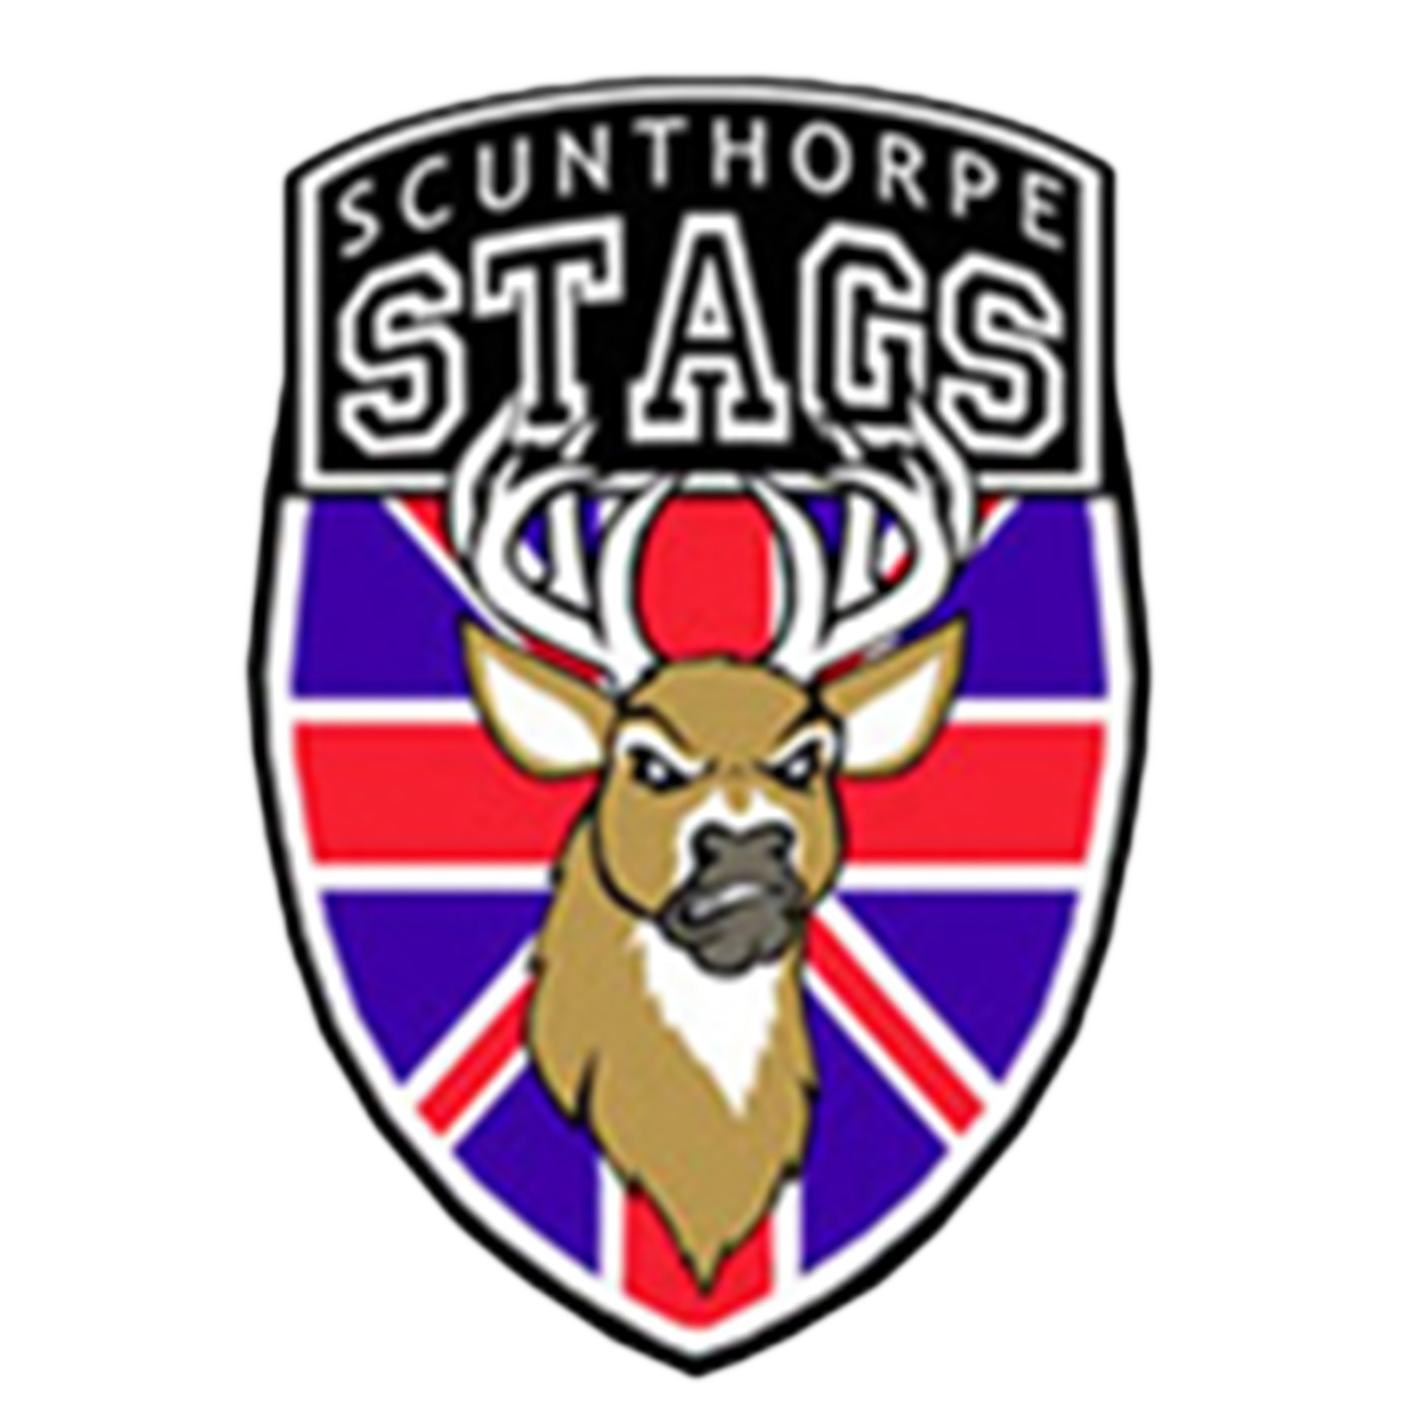 Scunthorpe Stags